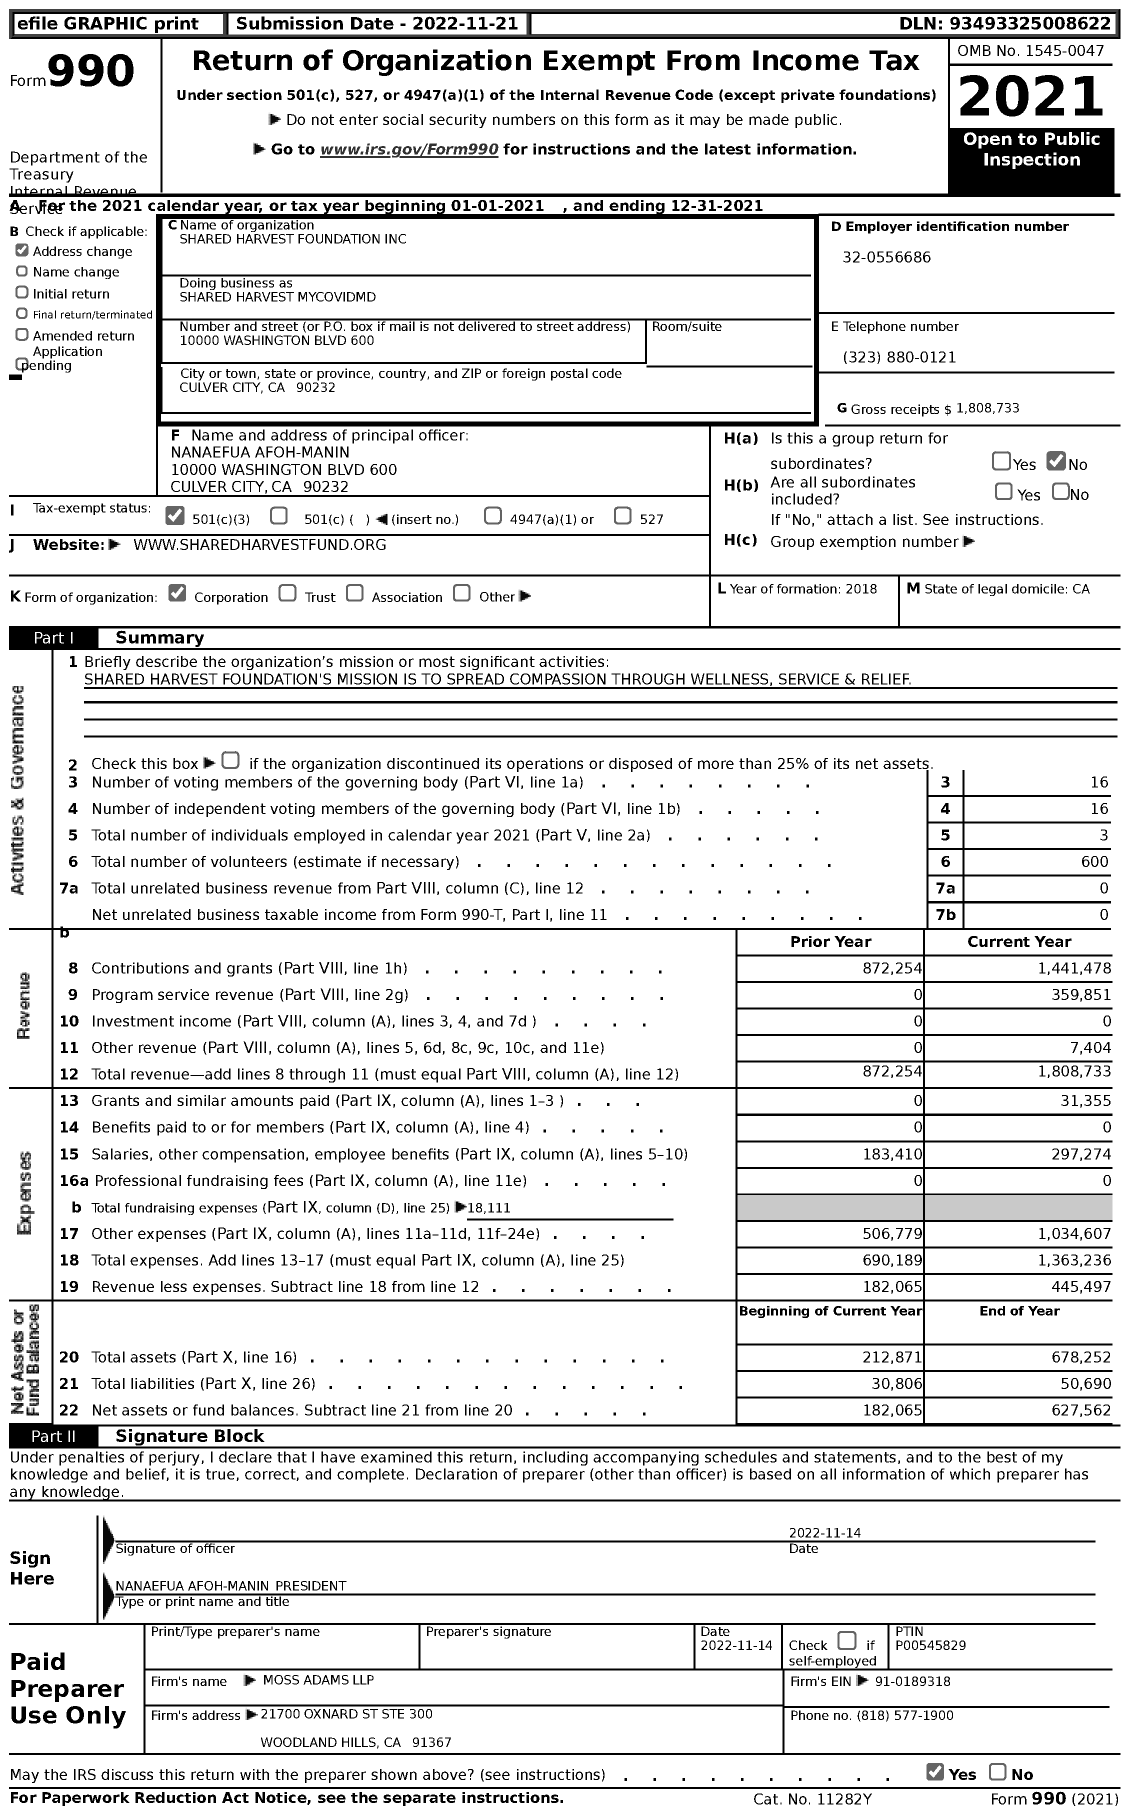 Image of first page of 2021 Form 990 for Shared Harvest Mycovidmd